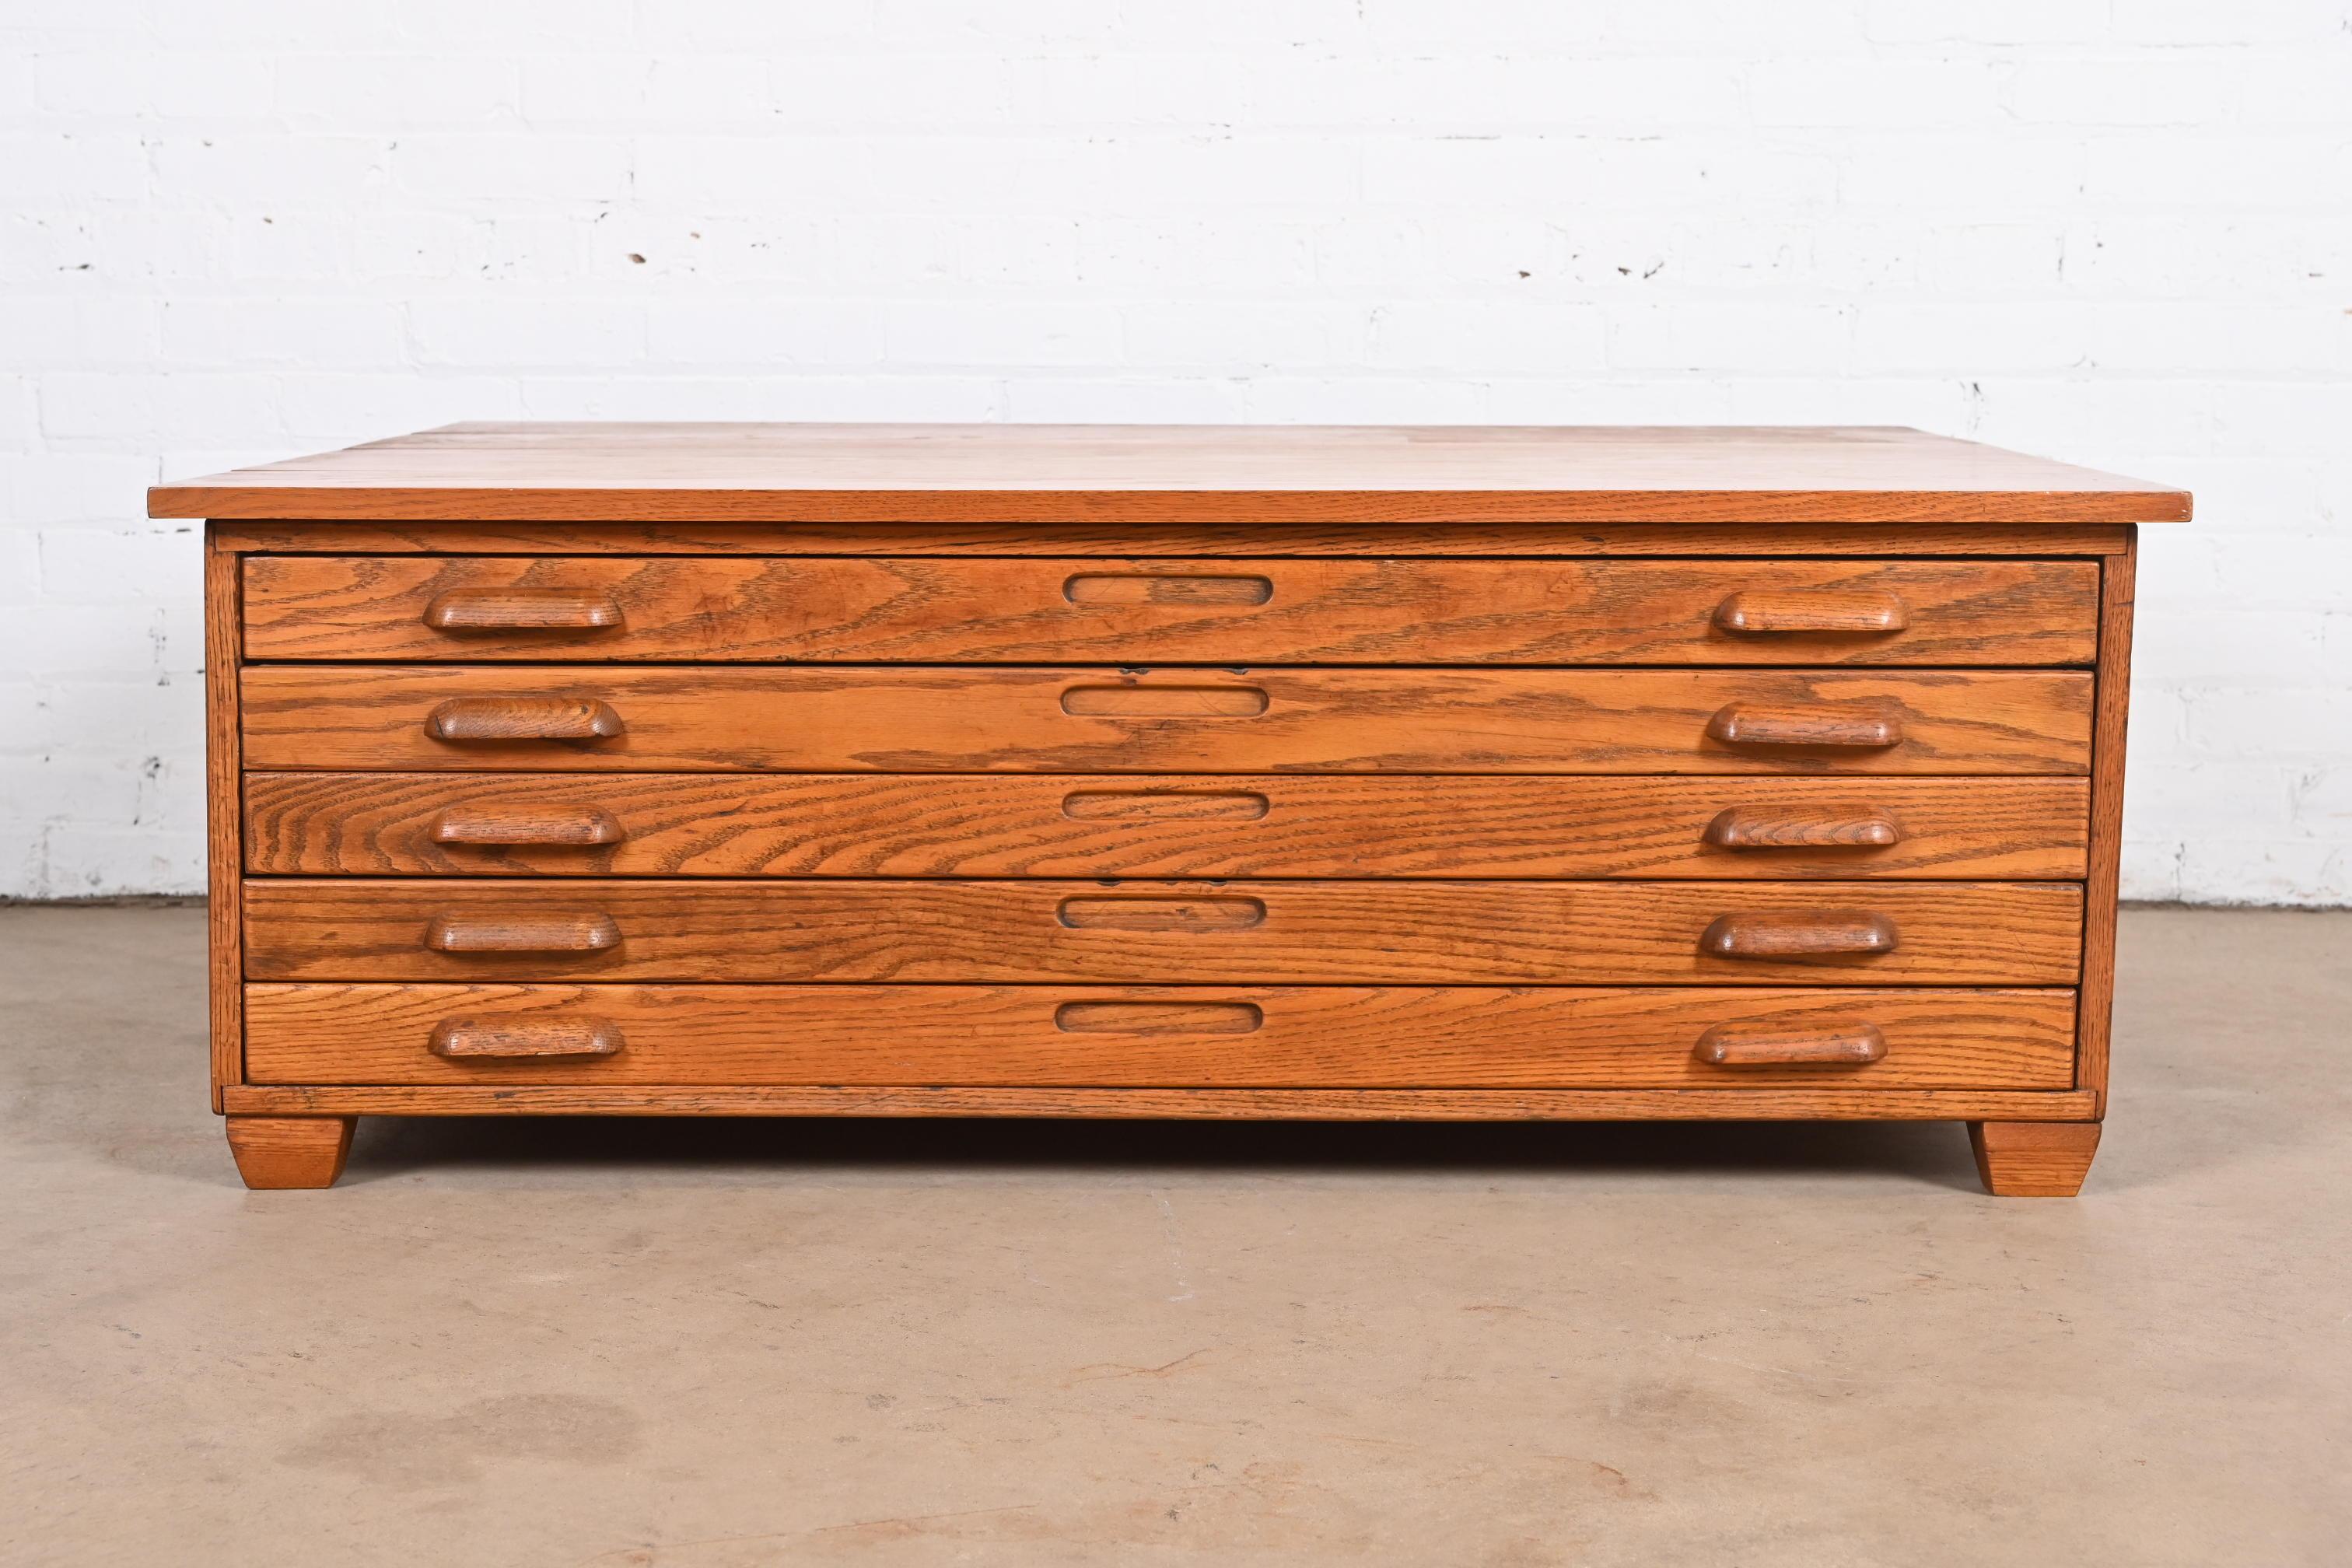 An exceptional Arts & Crafts style oak architect's blueprint or map flat file cabinet

USA, Mid-20th Century

Measures: 47.5